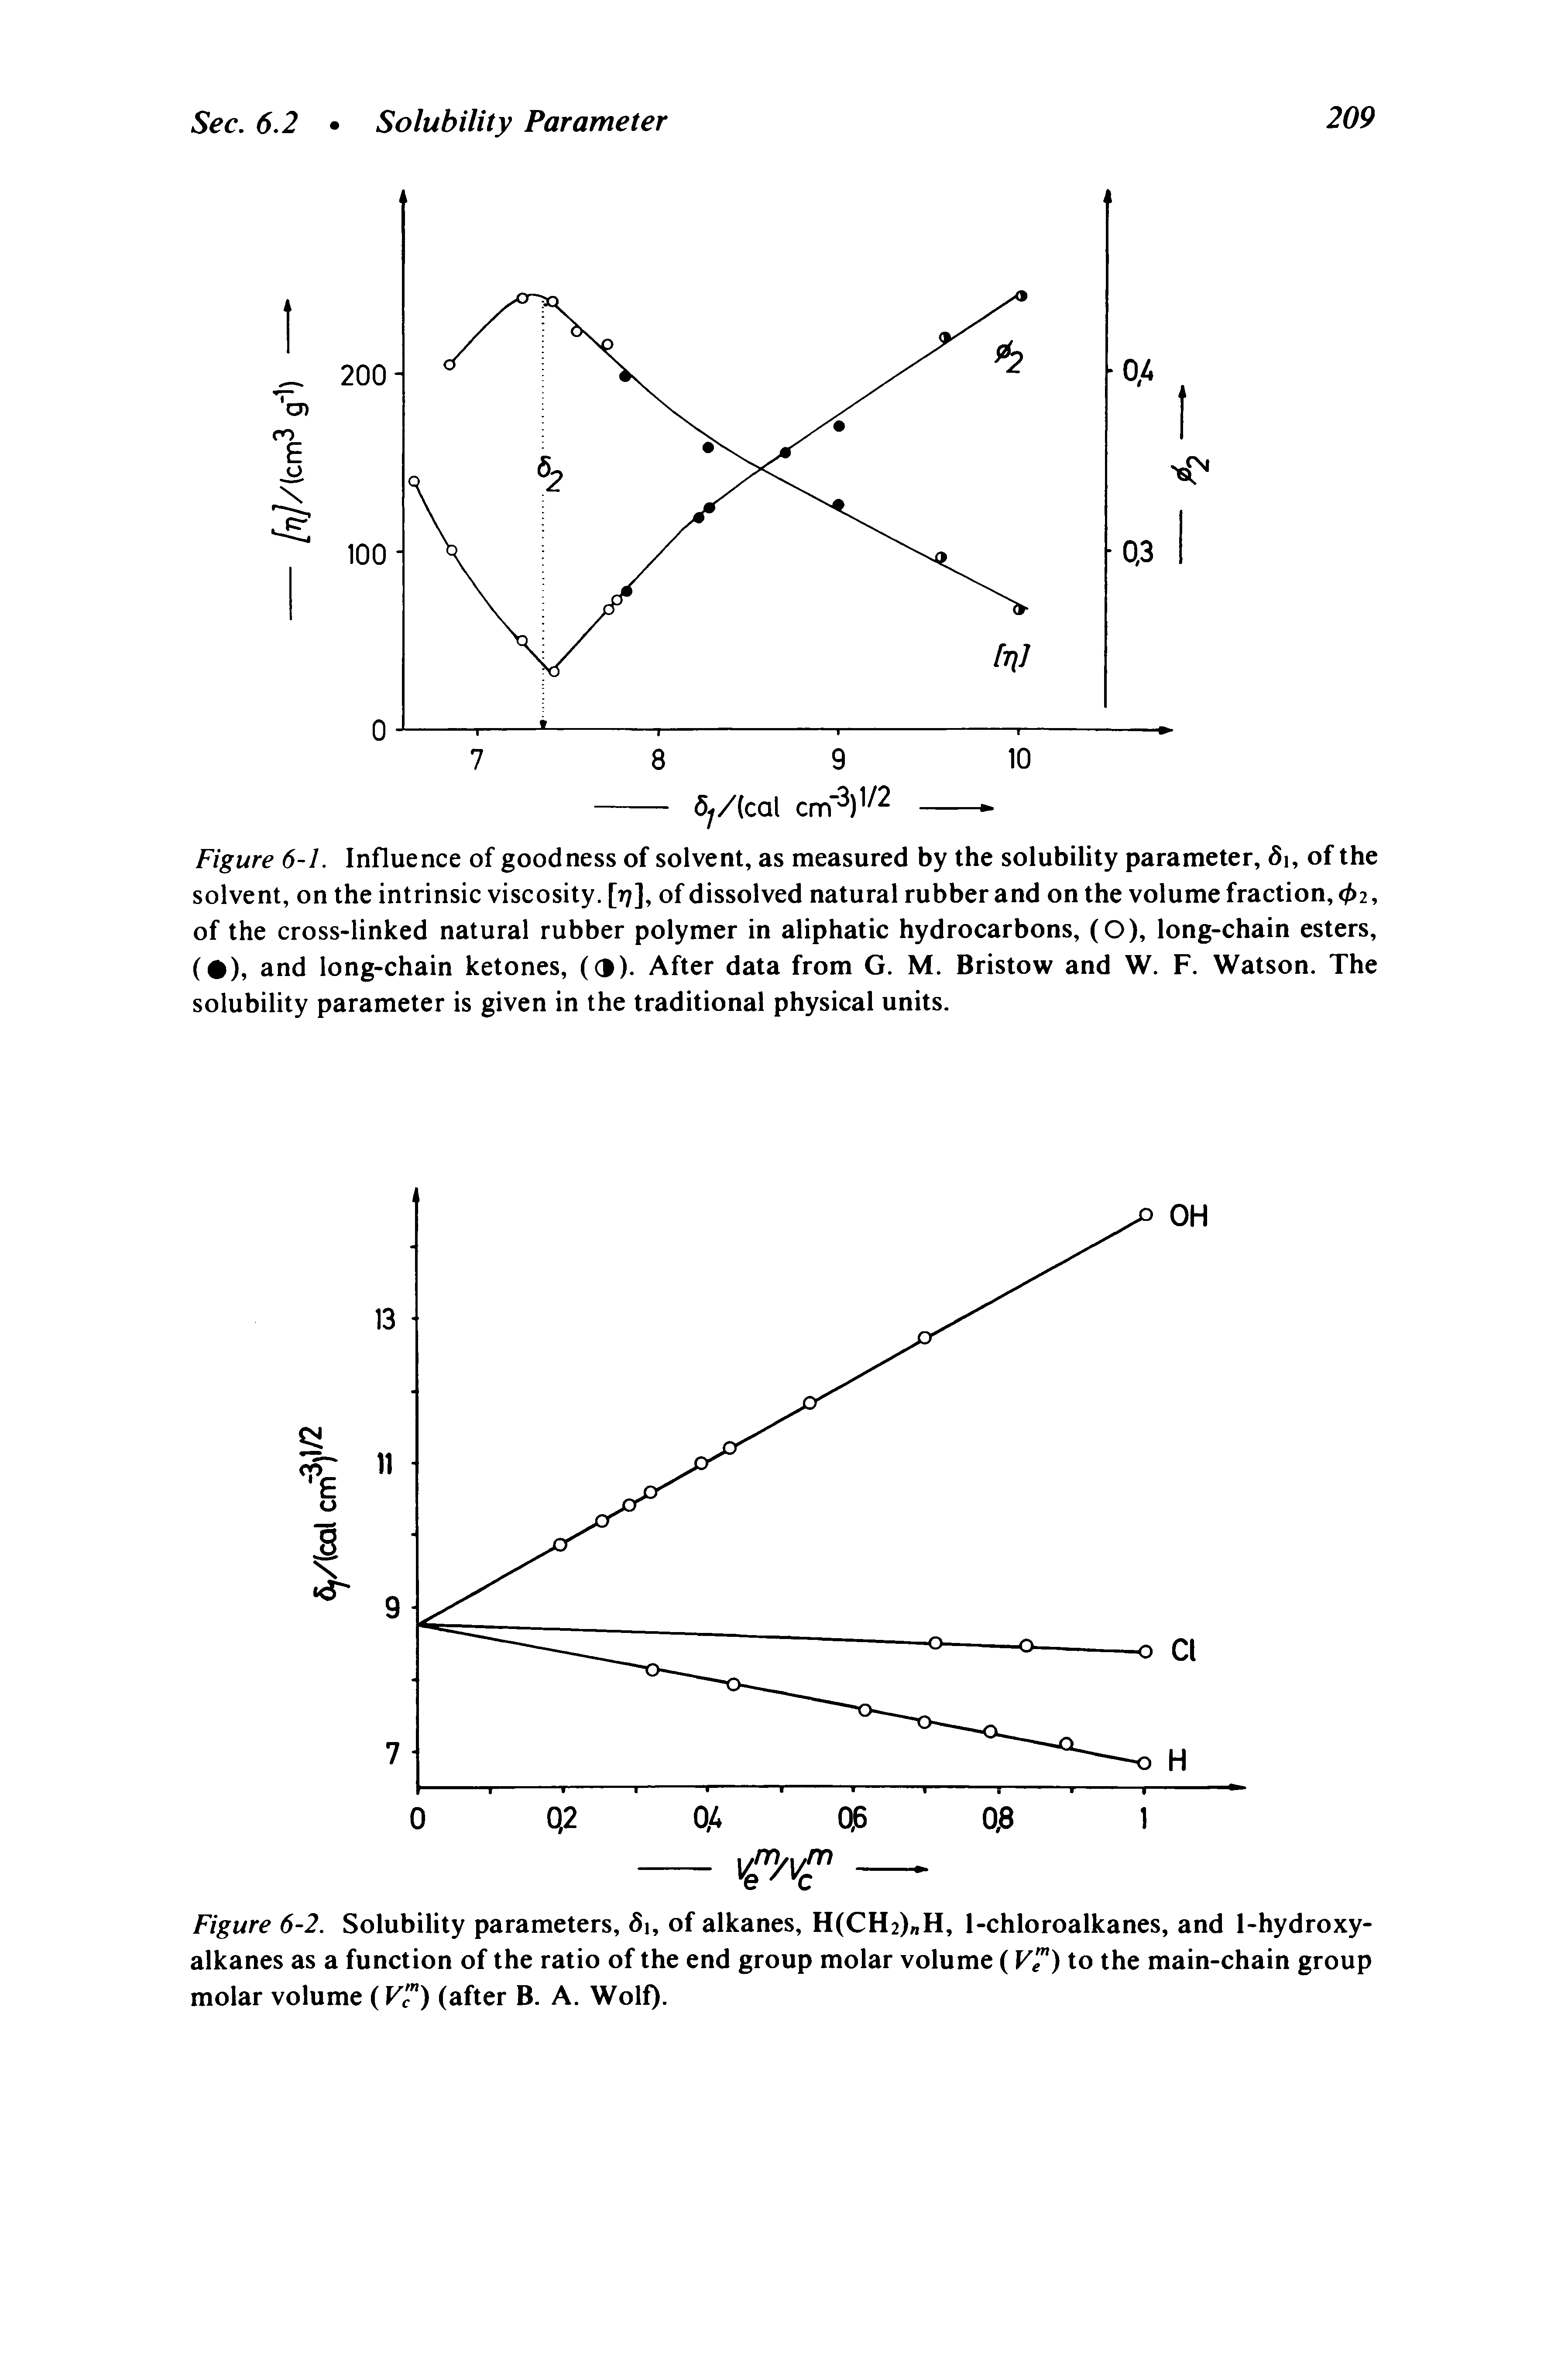 Figure 6-2. Solubility parameters, 61, of alkanes, H(CH2) H, 1-chloroalkanes, and 1-hydroxy-alkanes as a function of the ratio of the end group molar volume (VT) to the main-chain group molar volume (Ff) (after B. A. Wolf).